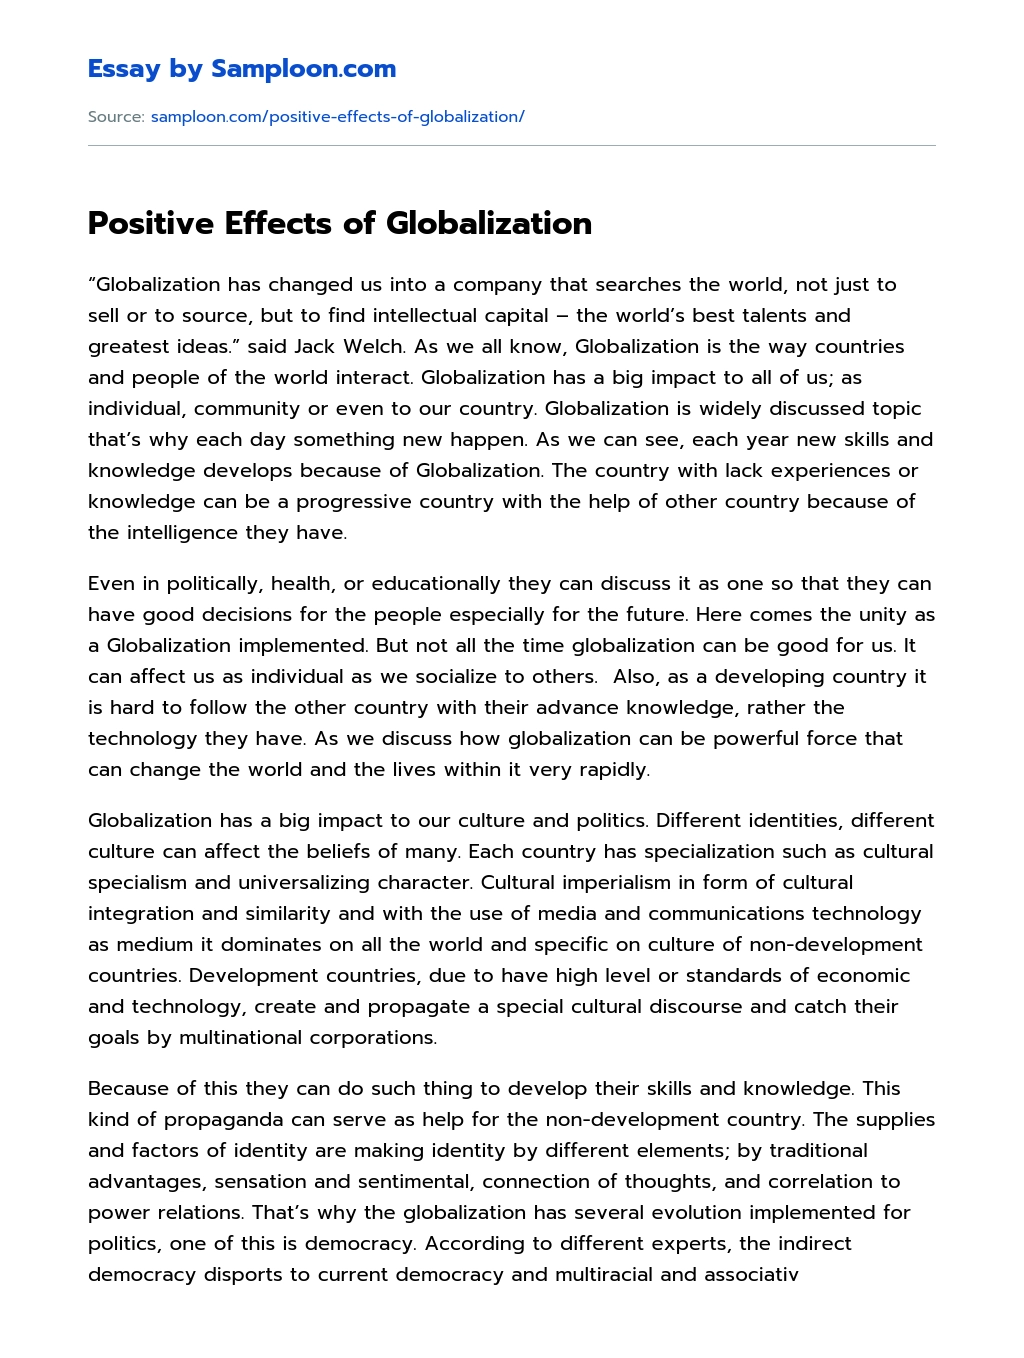 Positive Effects of Globalization essay